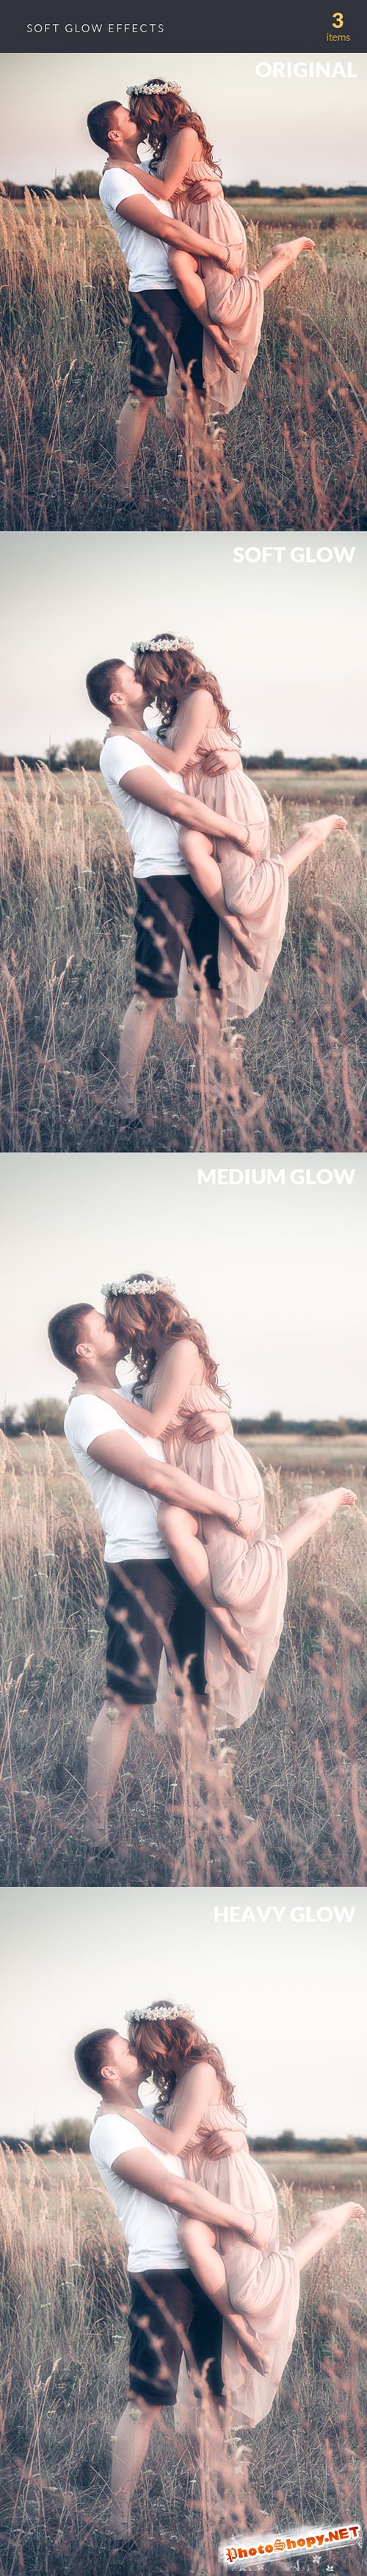 Soft Glow FX Photo Effects Photoshop Actions